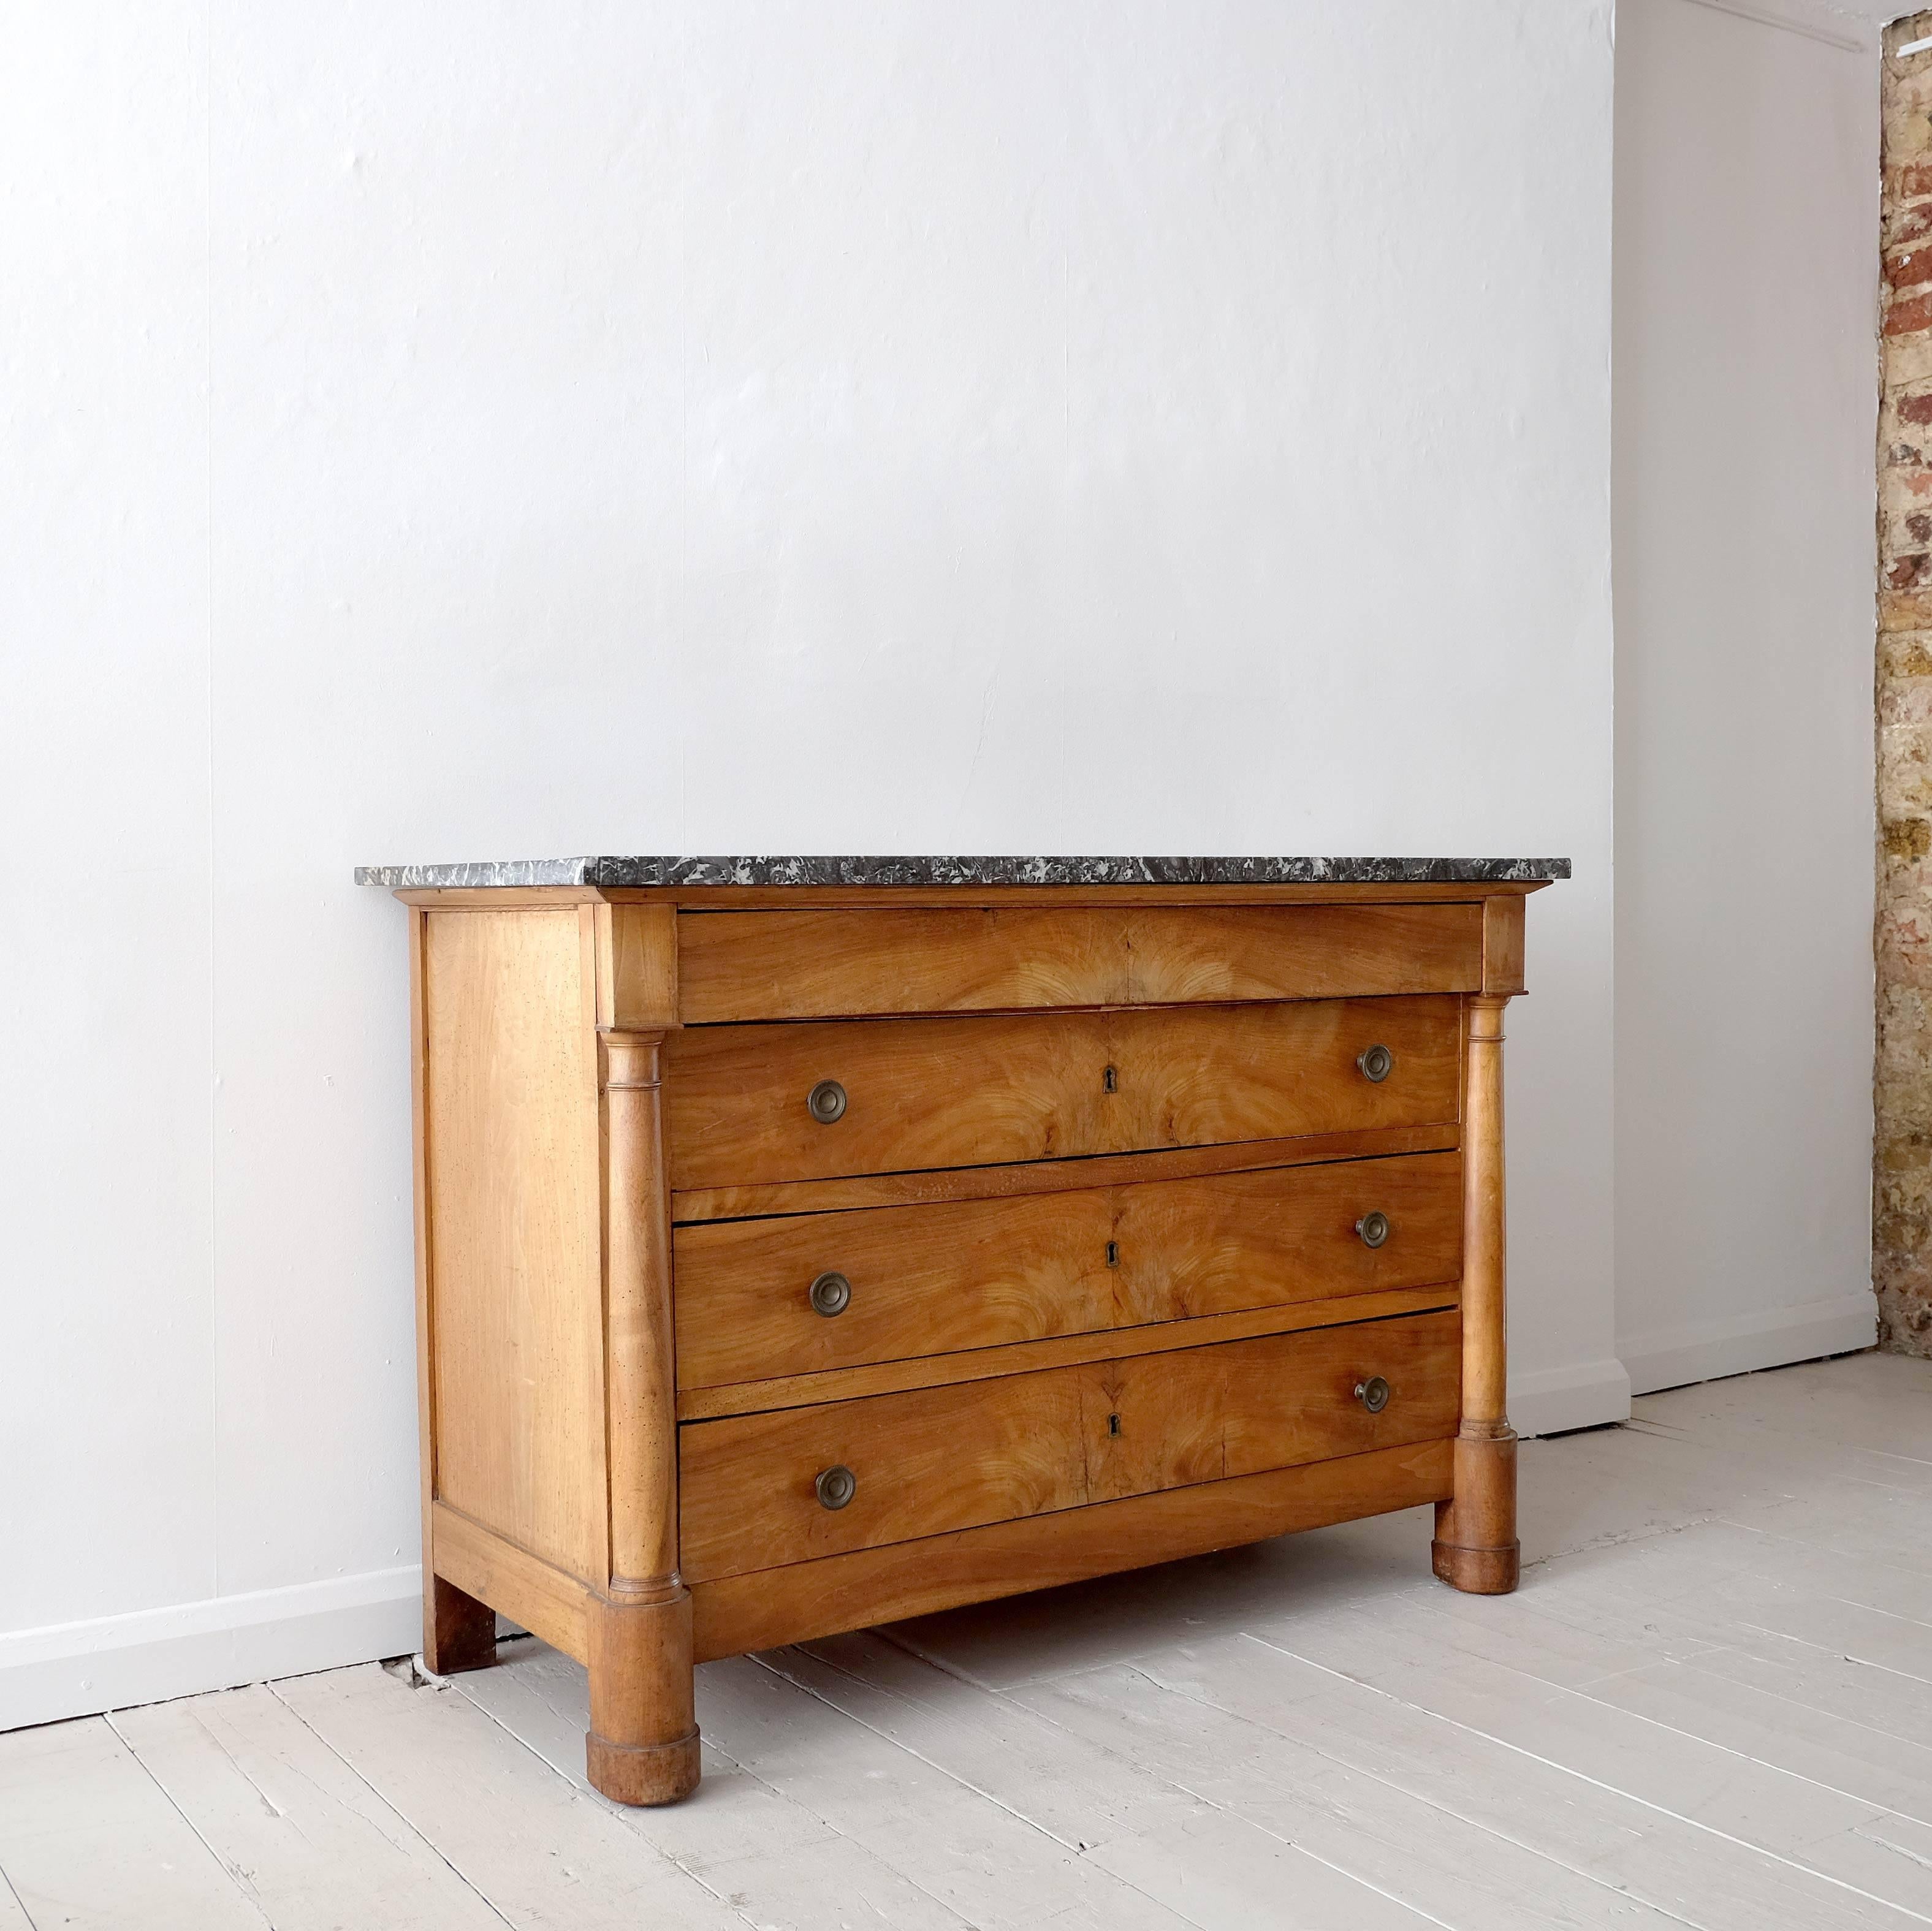 Very smart French commode in cheerywood, late 19th century, substantial and original marble top, nice colour, clean simple design. Some evidence of now long gone wood worm but otherwise in good condition.

Dimensions: H 90 x W 130 x D 59cm.